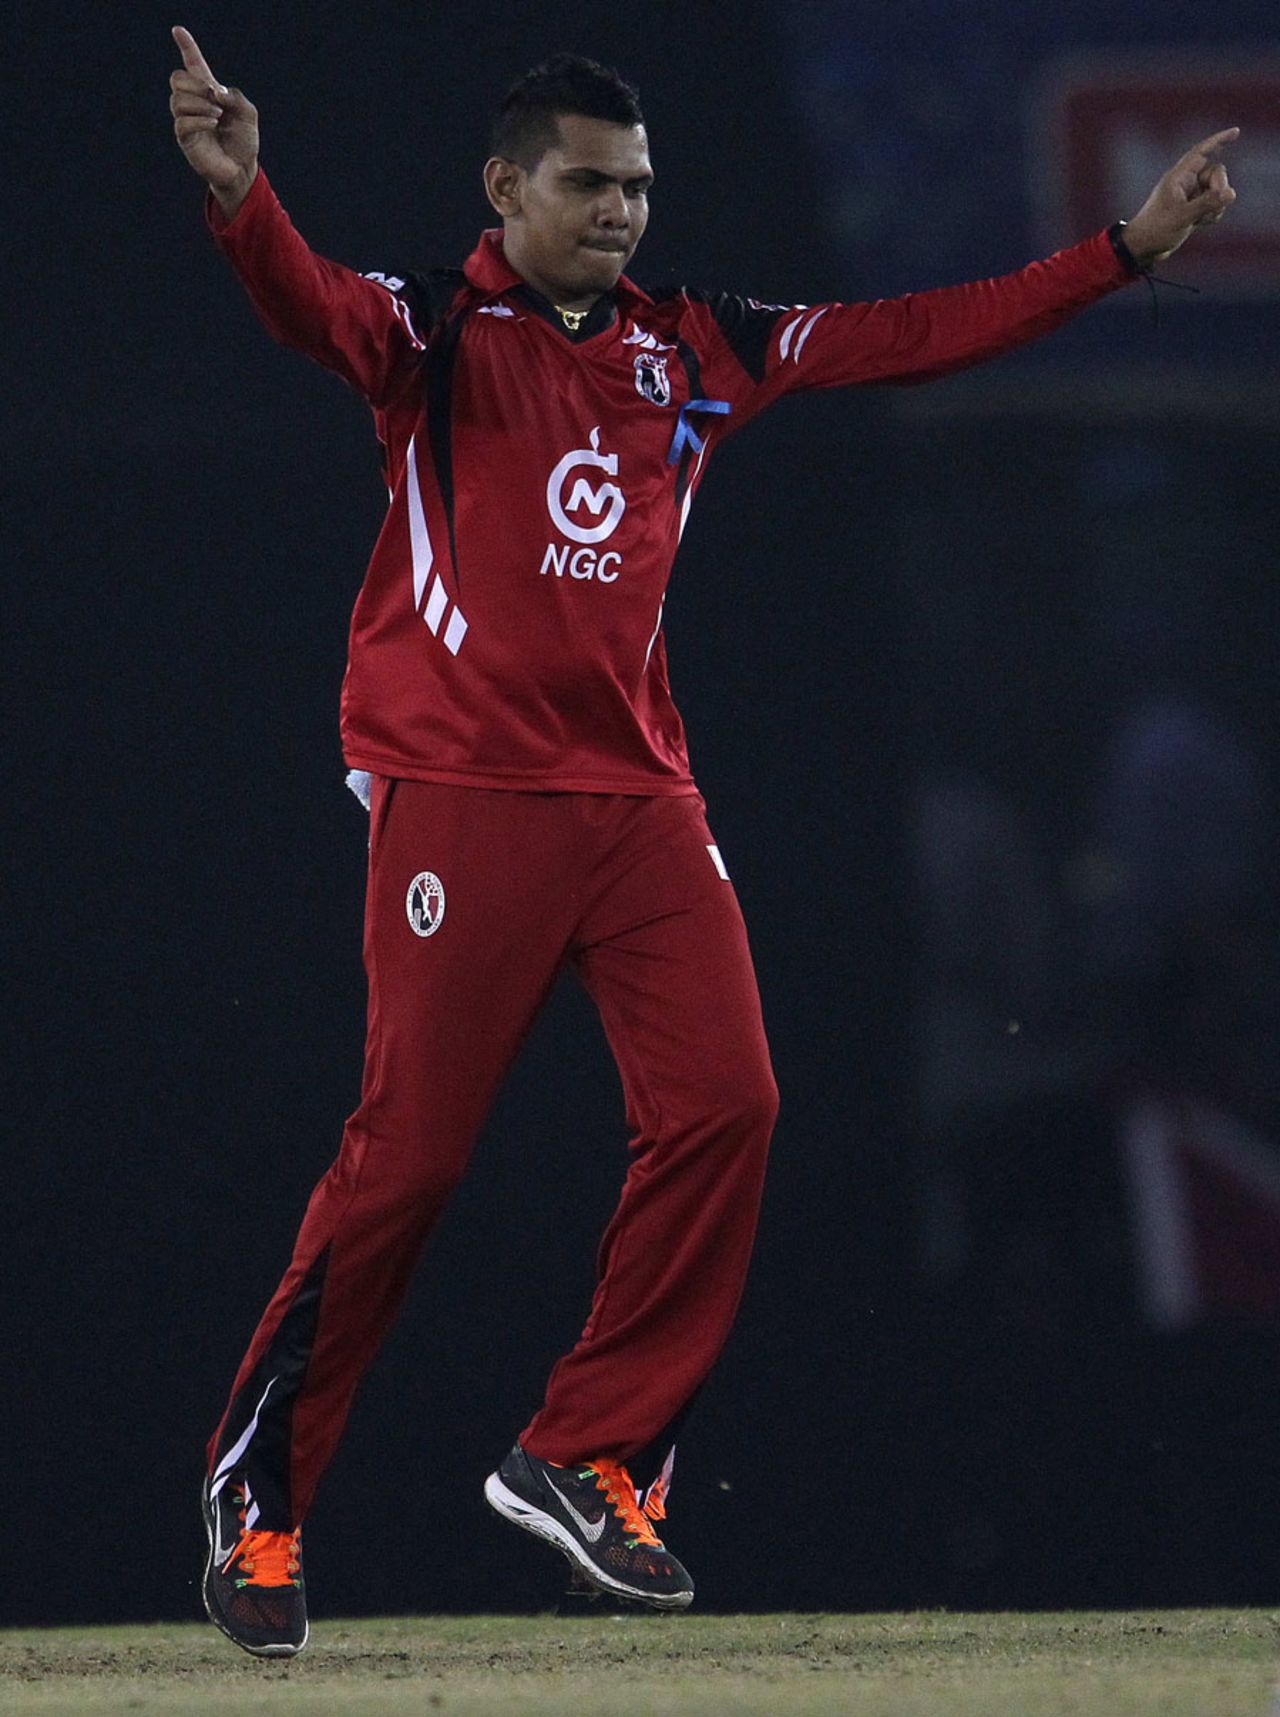 Sunil Narine picked up four wickets, Trinidad & Tobago v Sunrisers Hyderabad, Group B, Champions League 2013, Mohali, September 24, 2013